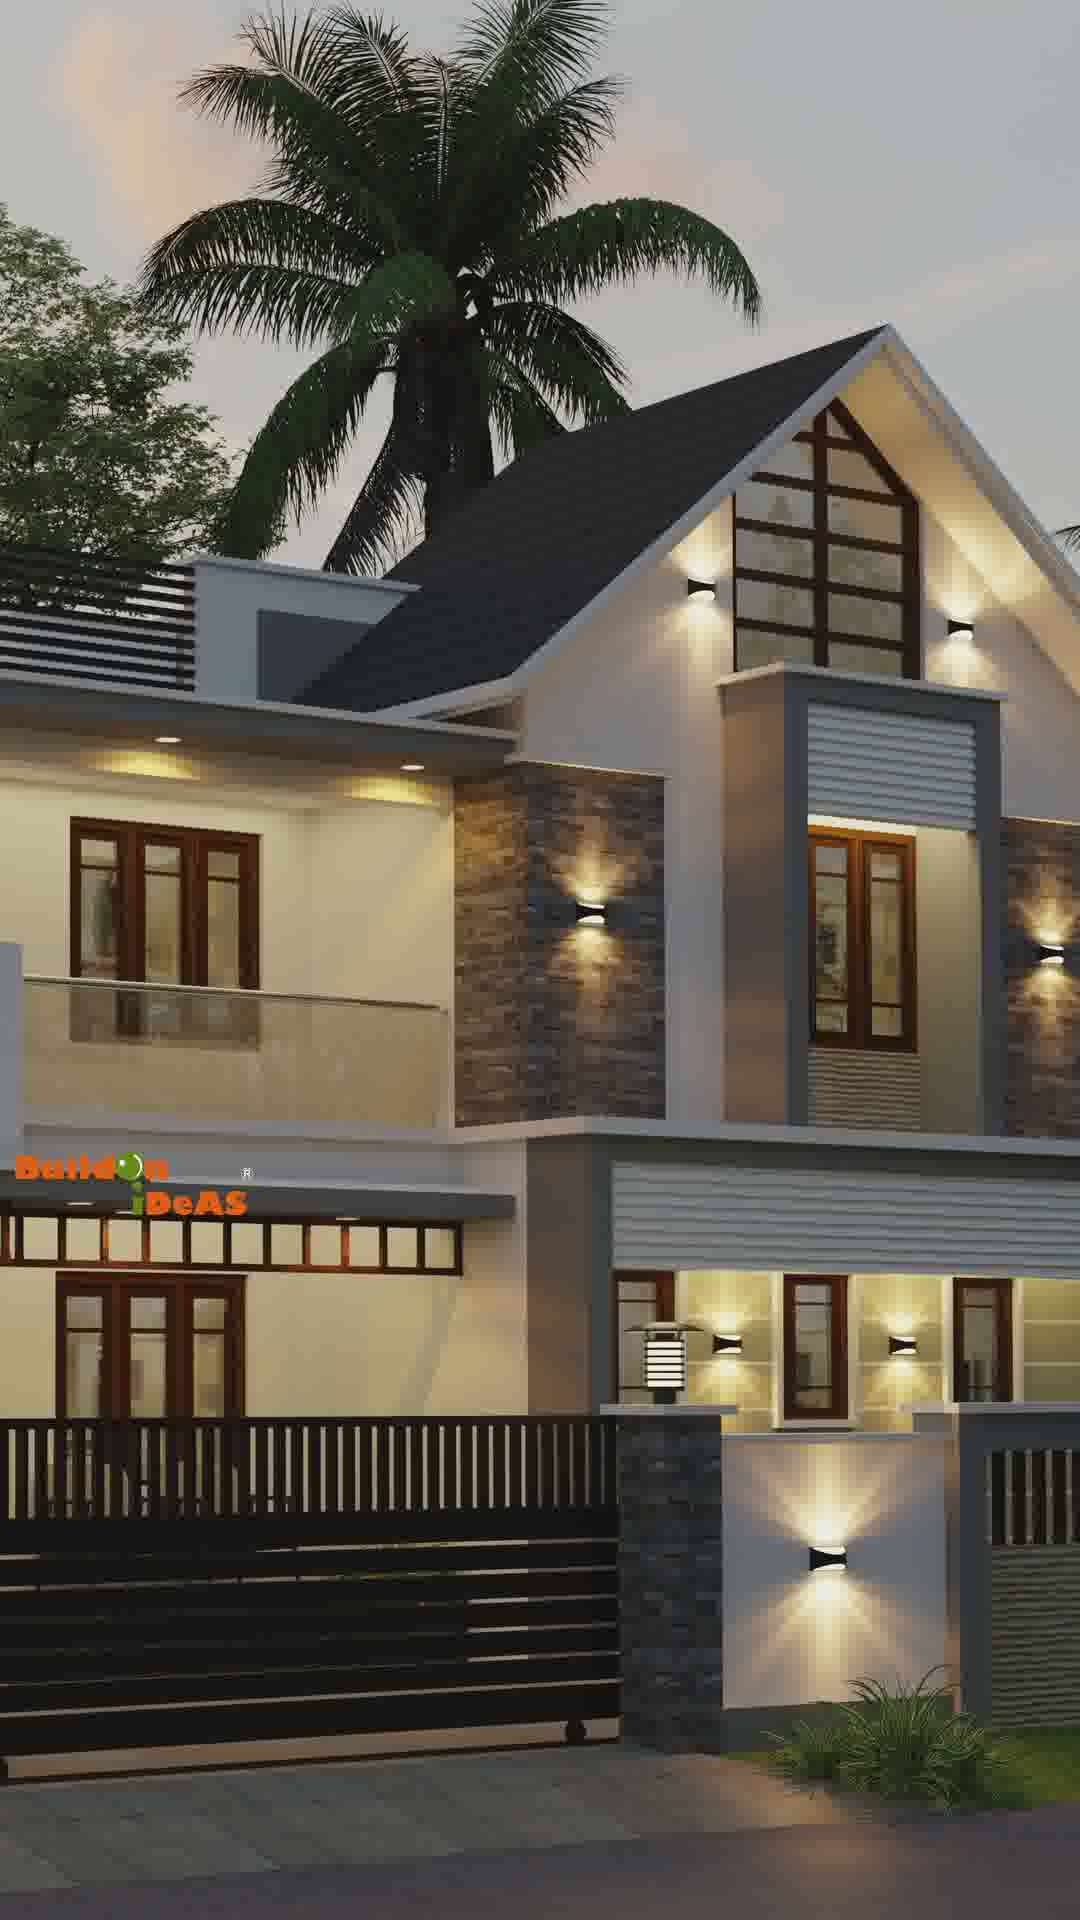 Beautiful house #3delevation  #3dhousedesign #best3ddesigner #3Ddesigner  #homedesignkerala #home3d #ElevationHome